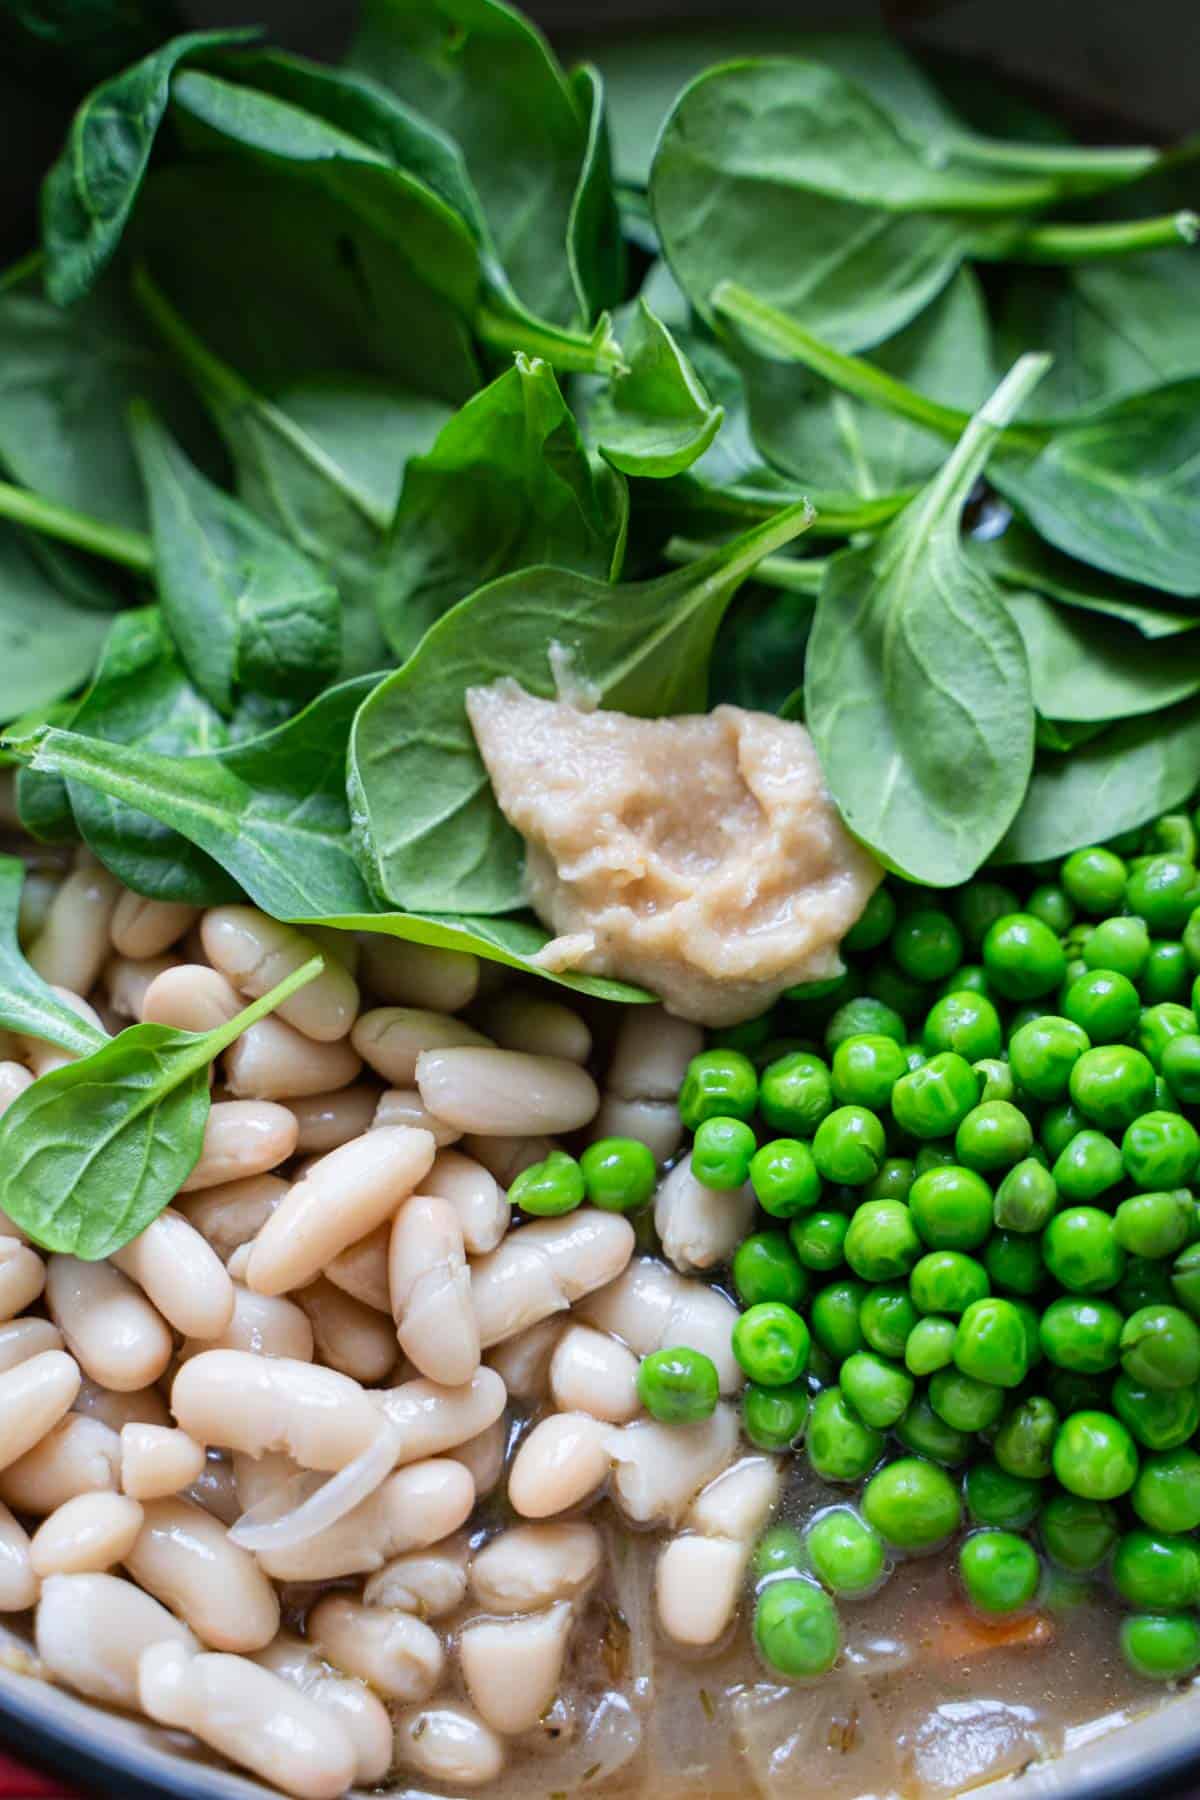 Spinach, soup puree, beans and peas added into the creamy 10 vegetable and bean soup.